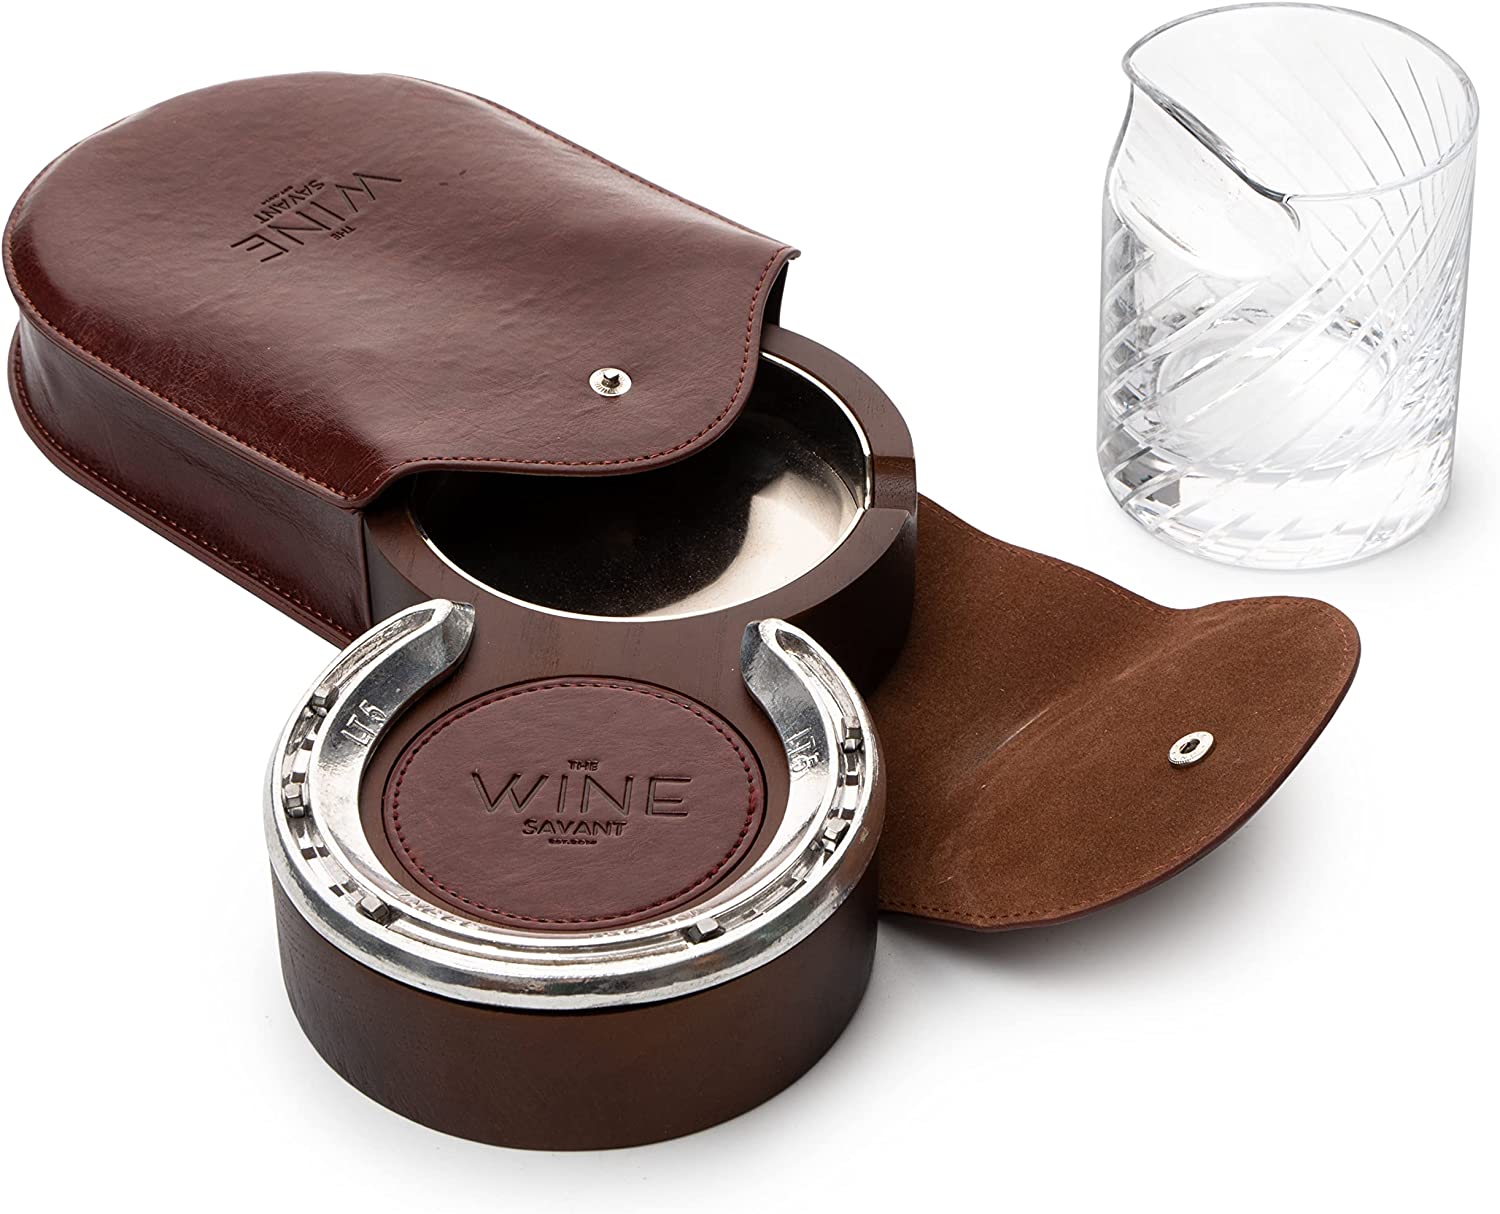 The Wine Savant Luxurious Cigar Glass - in A Leather Horseshoe Storage Case Whiskey Glassware with Cigar Holder - 10oz Cigar Holder Whiskey, Ash Tray